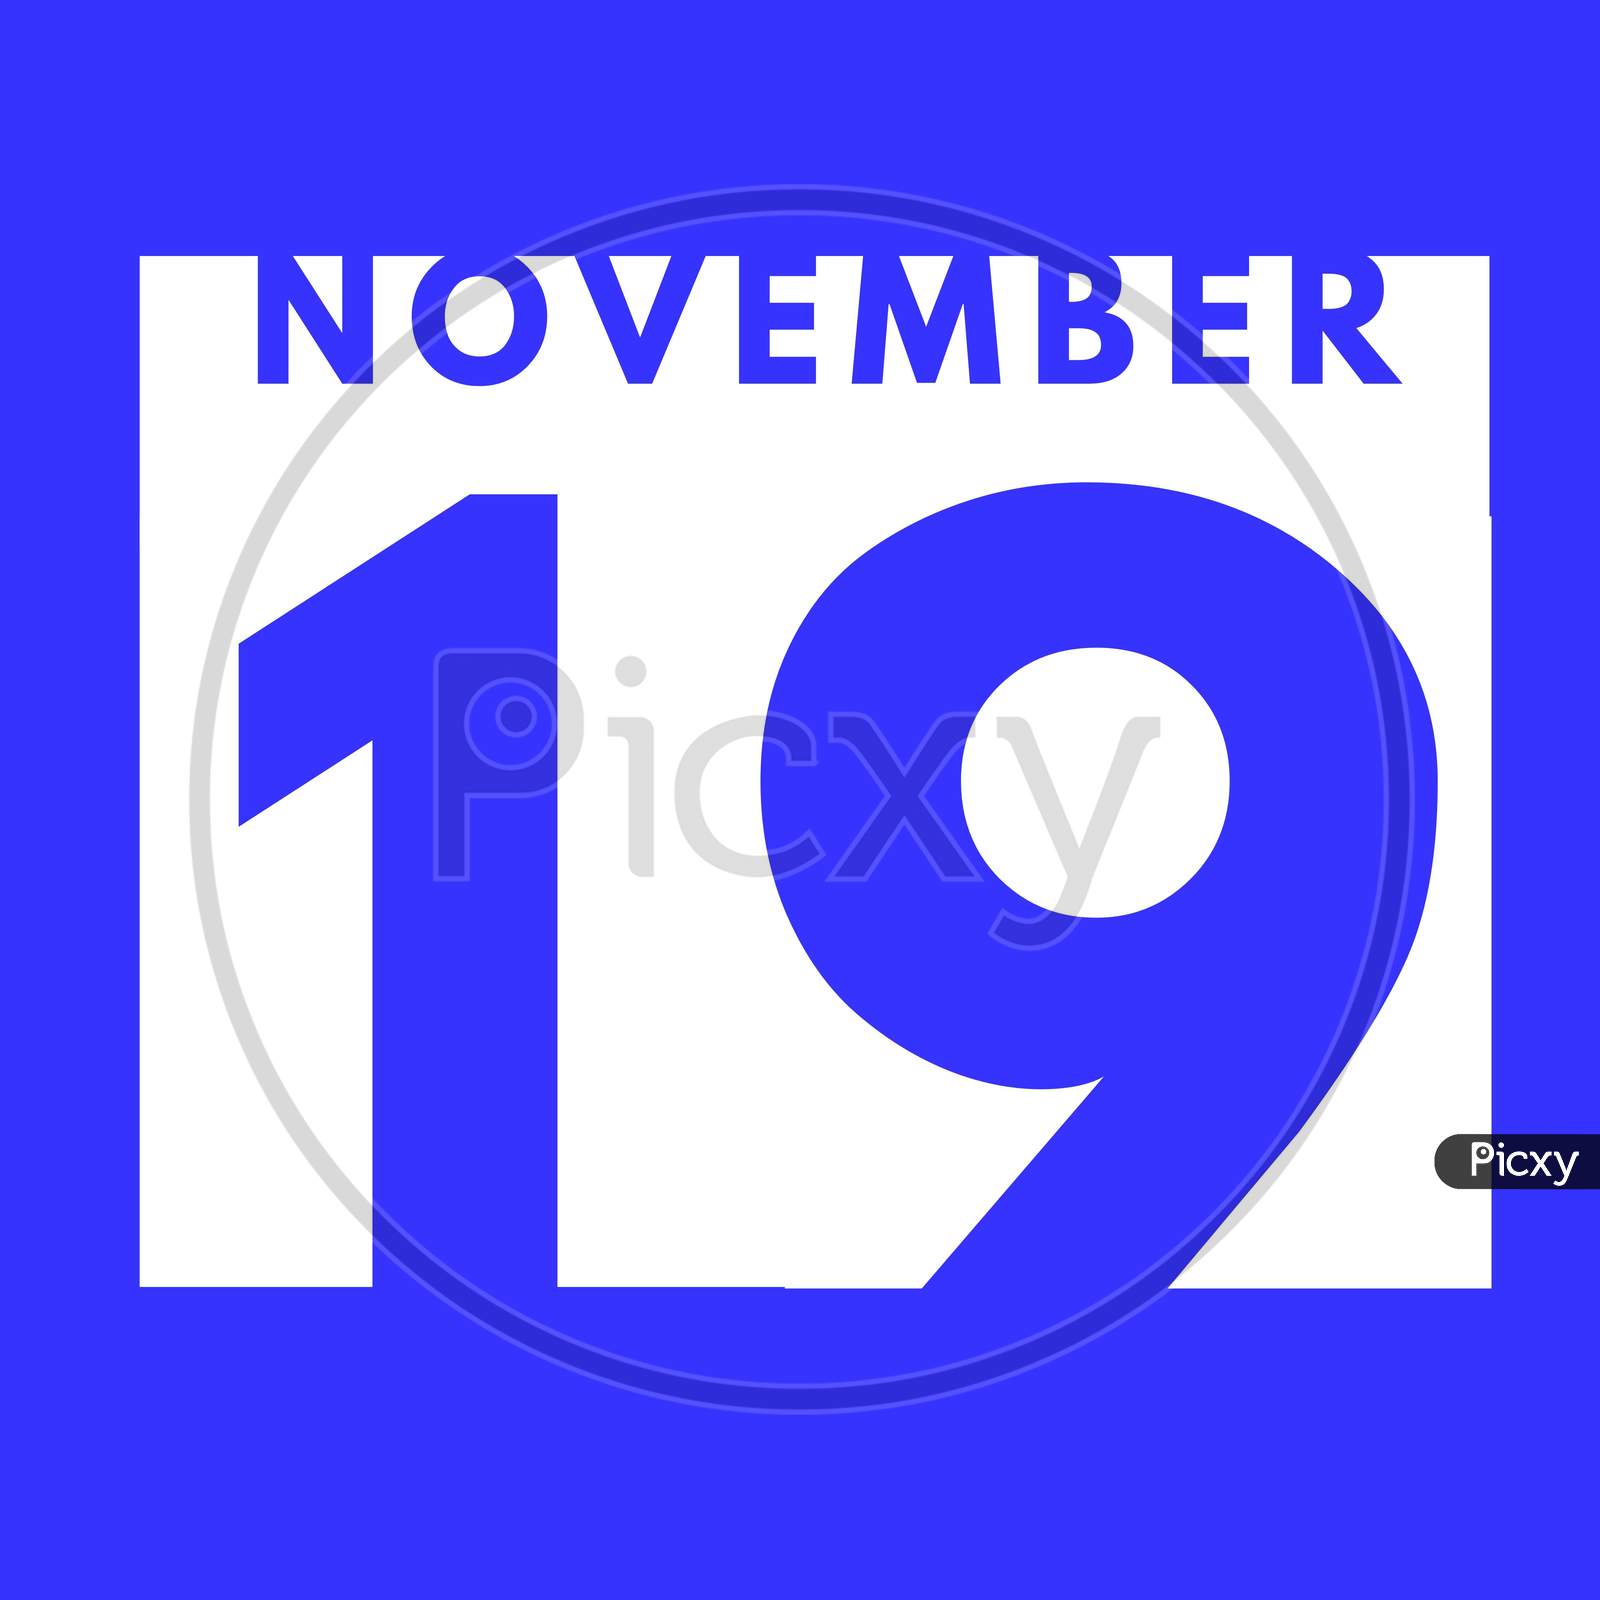 November 19 . Flat Modern Daily Calendar Icon .Date ,Day, Month .Calendar For The Month Of November